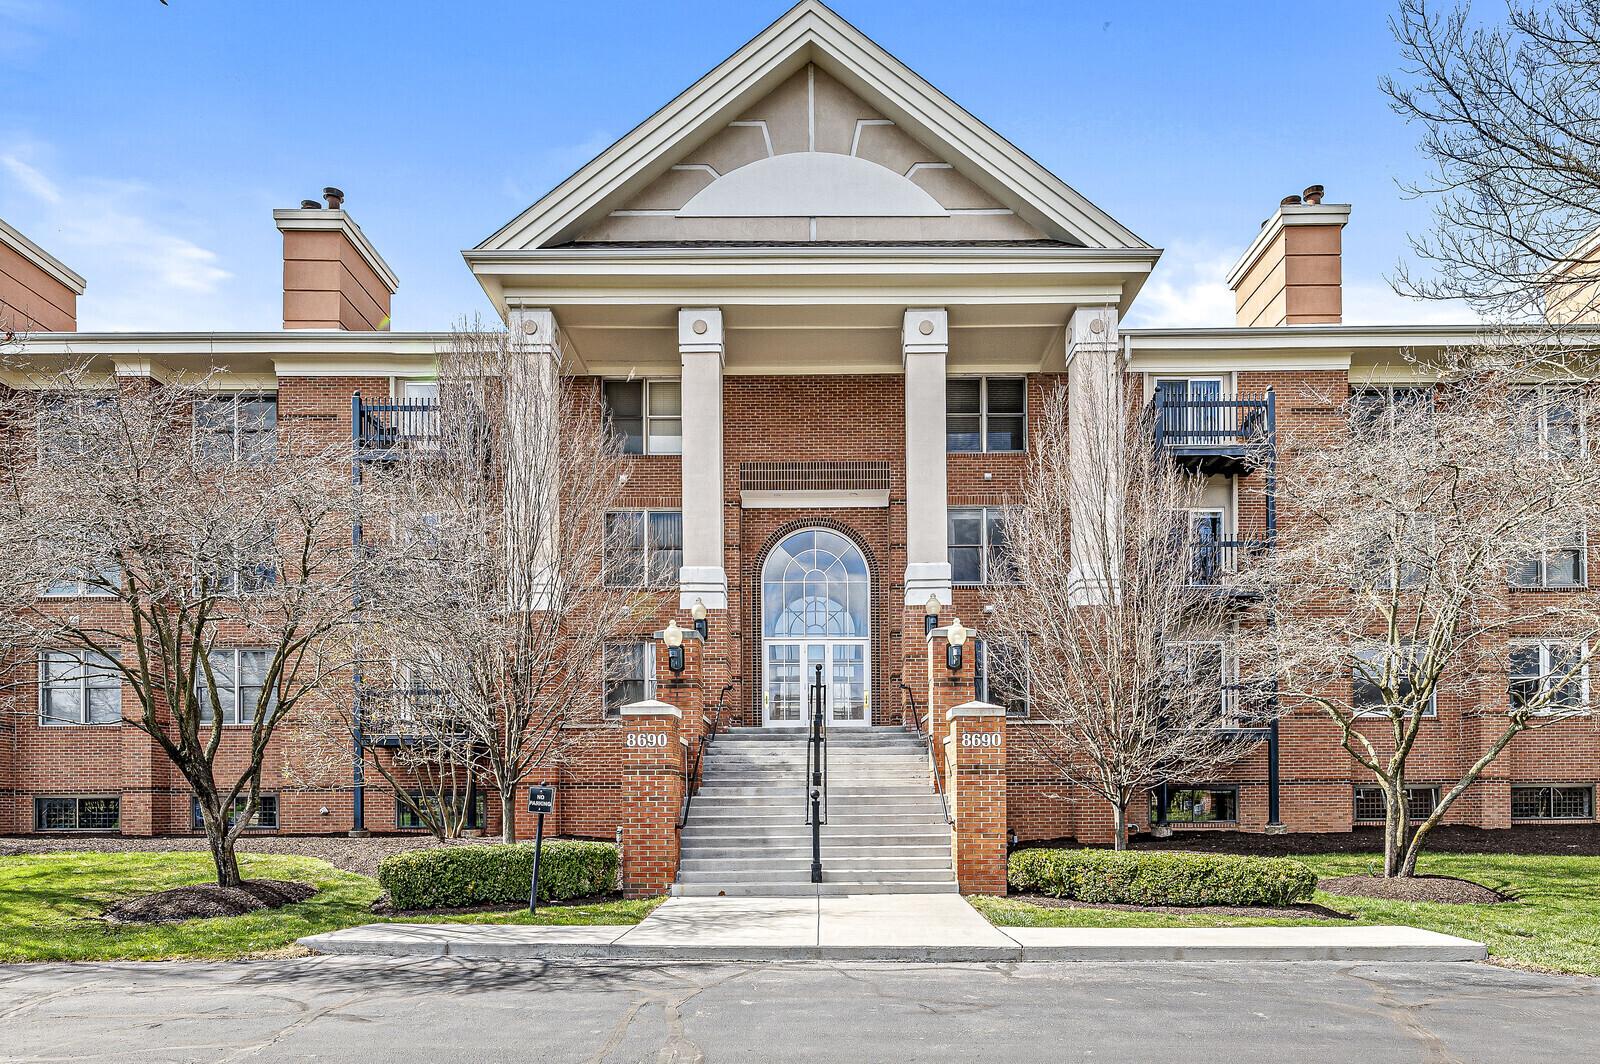 Photo one of 8690 Jaffa W Ct # Apt 25 Indianapolis IN 46260 | MLS 21966673